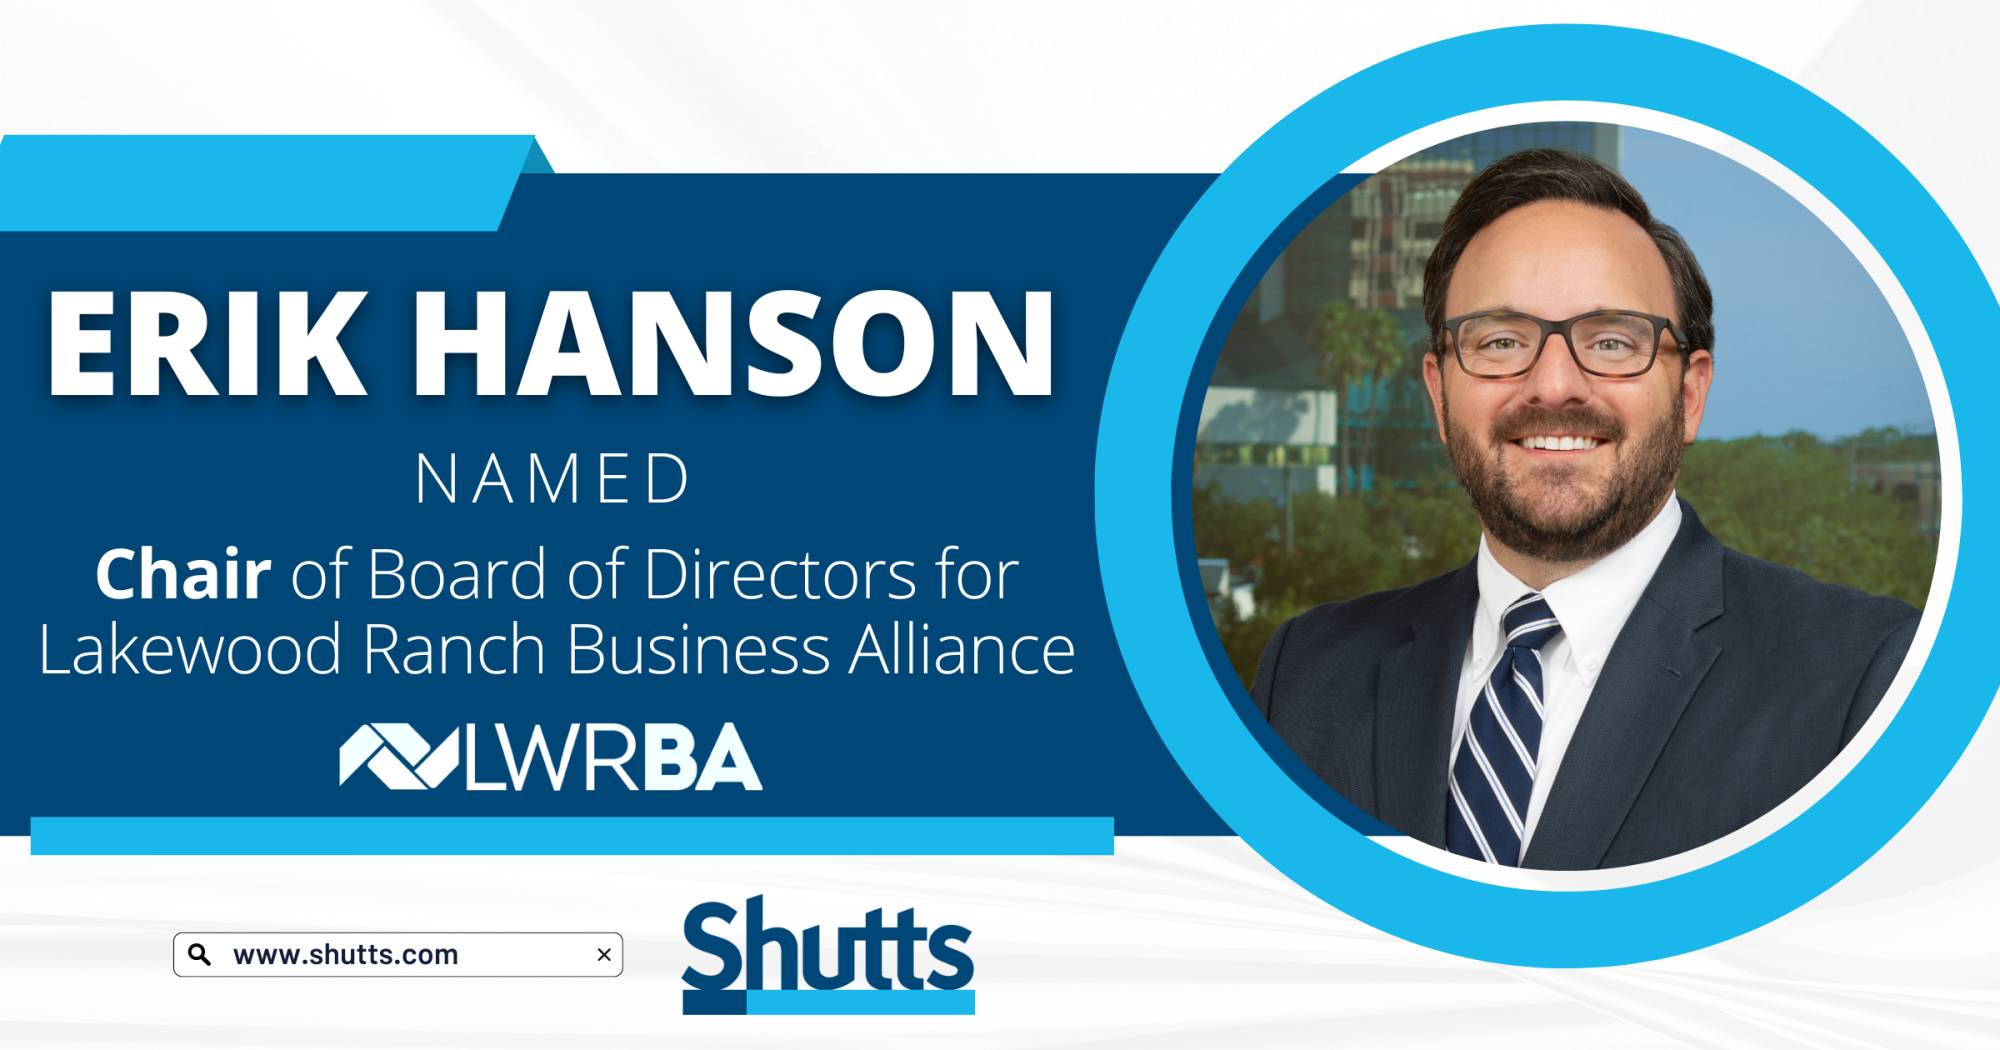 Erik Hanson Named Chair of Lakewood Ranch Business Alliance Board of Directors